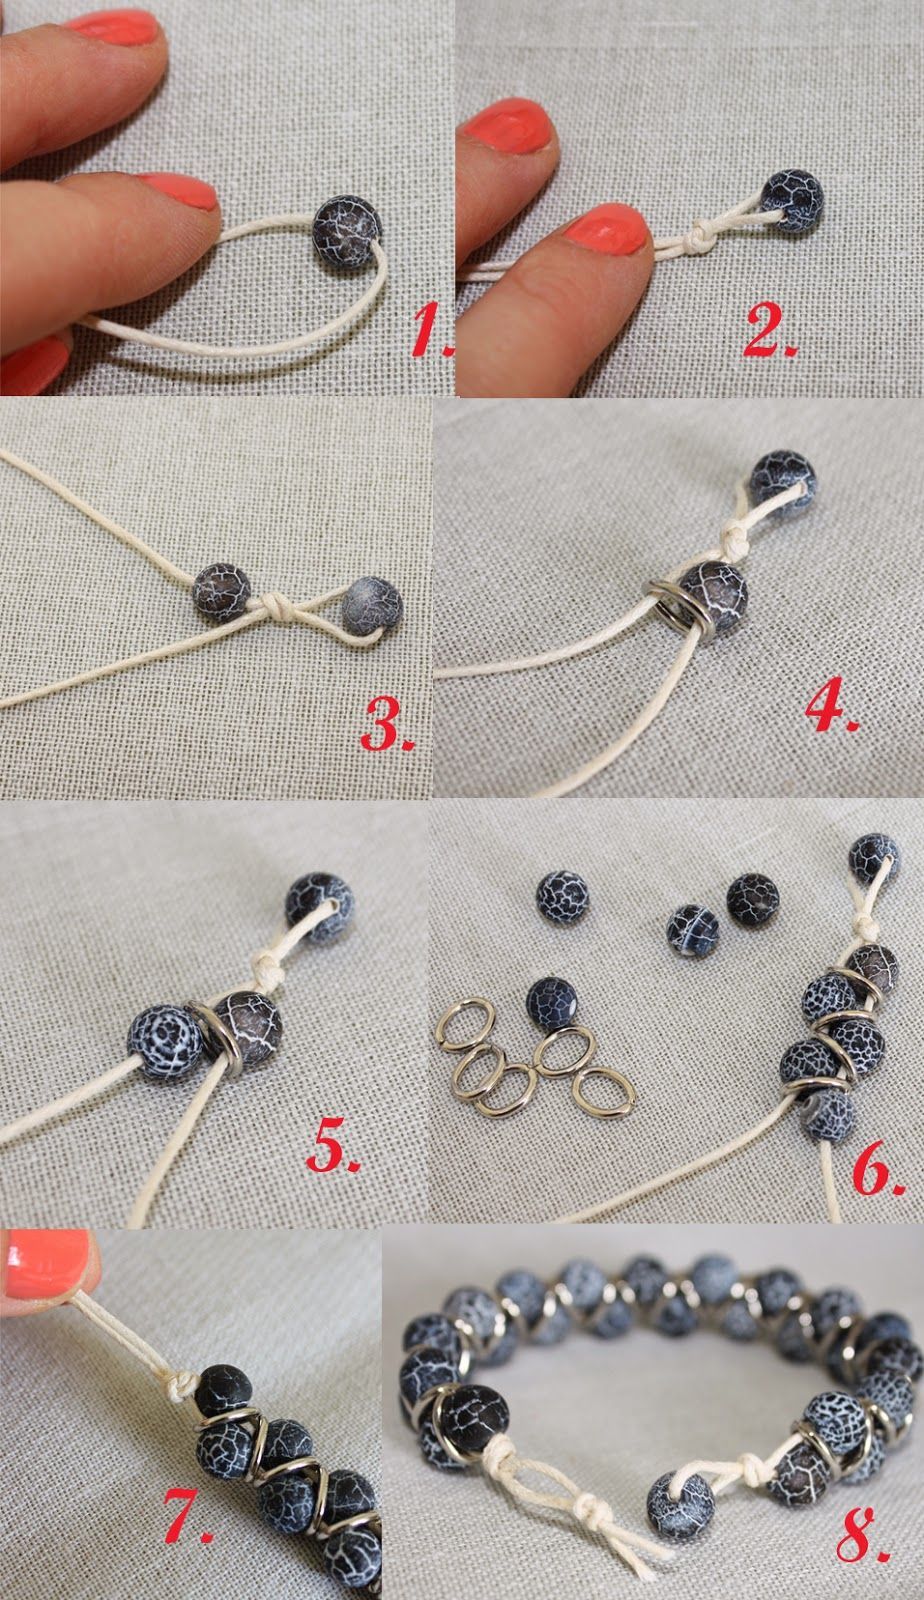 DIY: Zigzag Bracelet – You will need: A piece of oval 10×5 mm chain 40” cord 29-30 6mm beads 2 pliers Pr